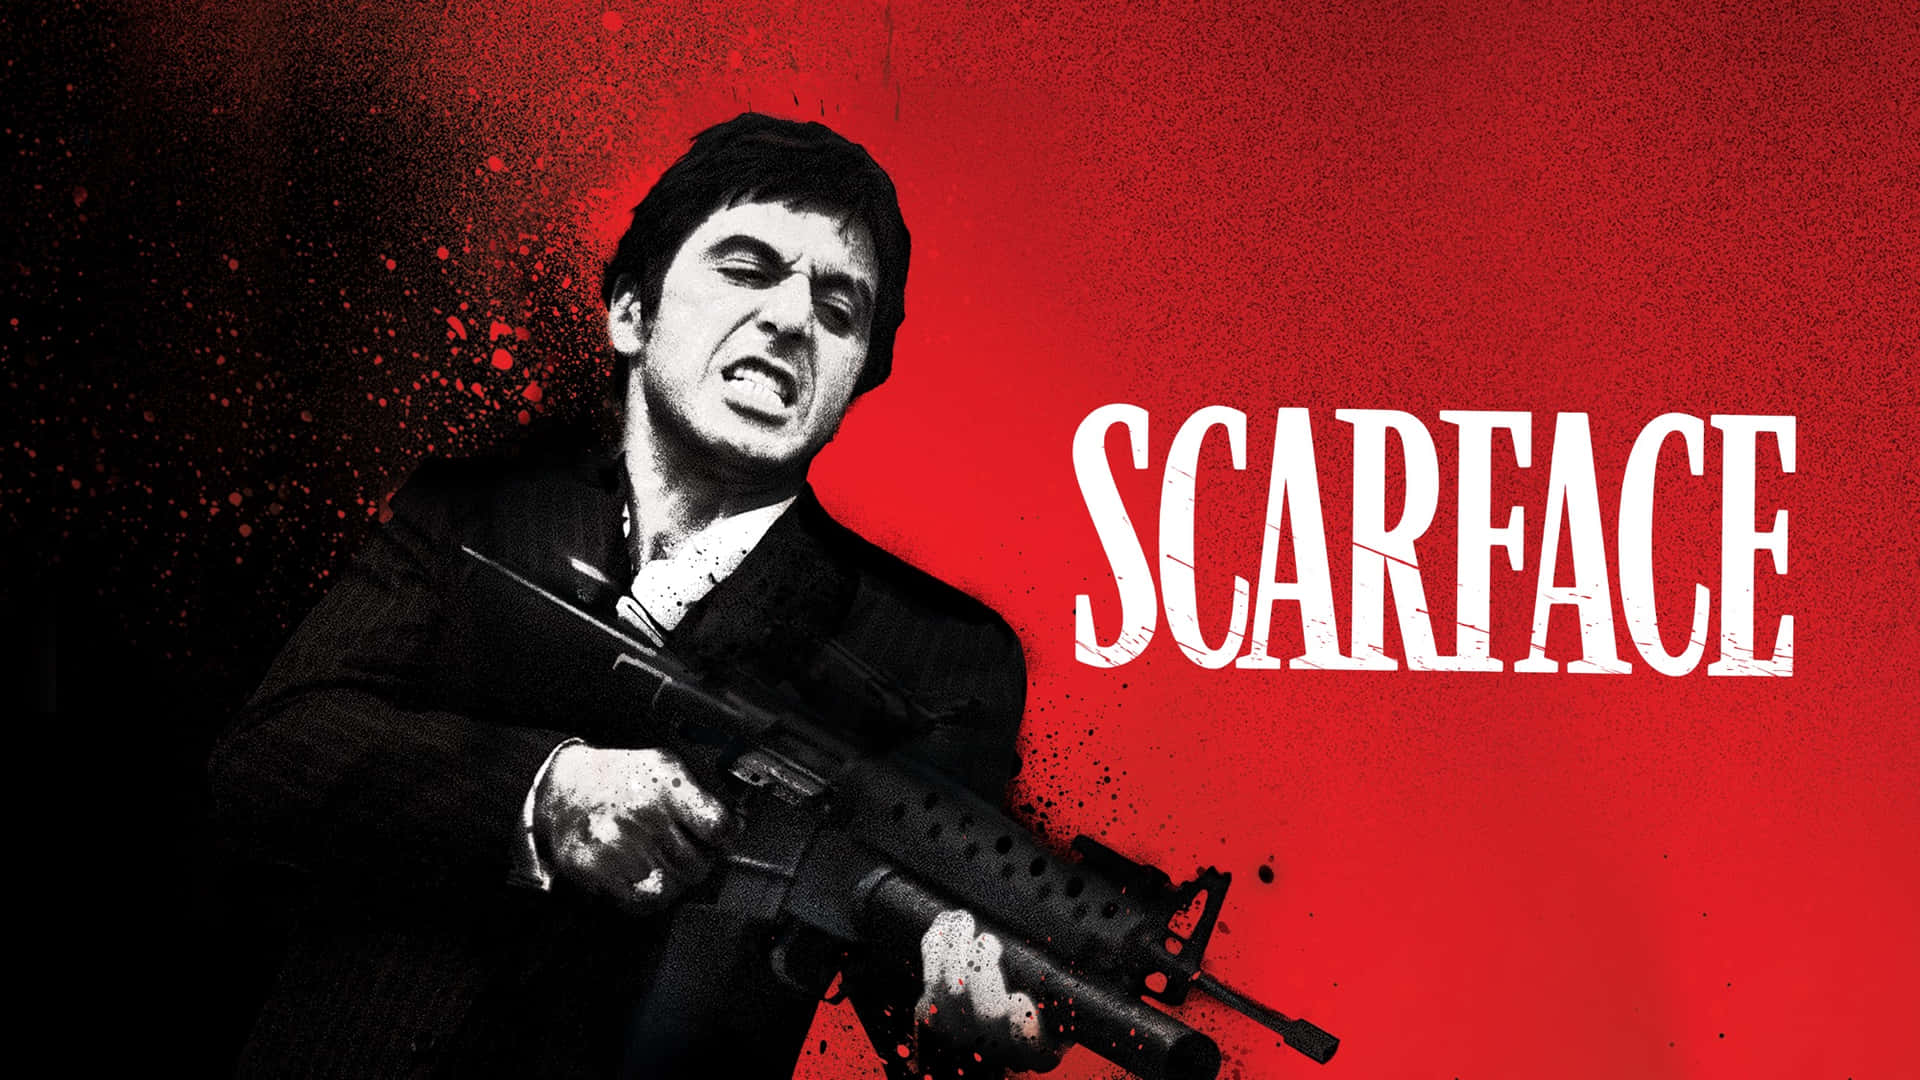 Scarface Movie Poster Artwork Background